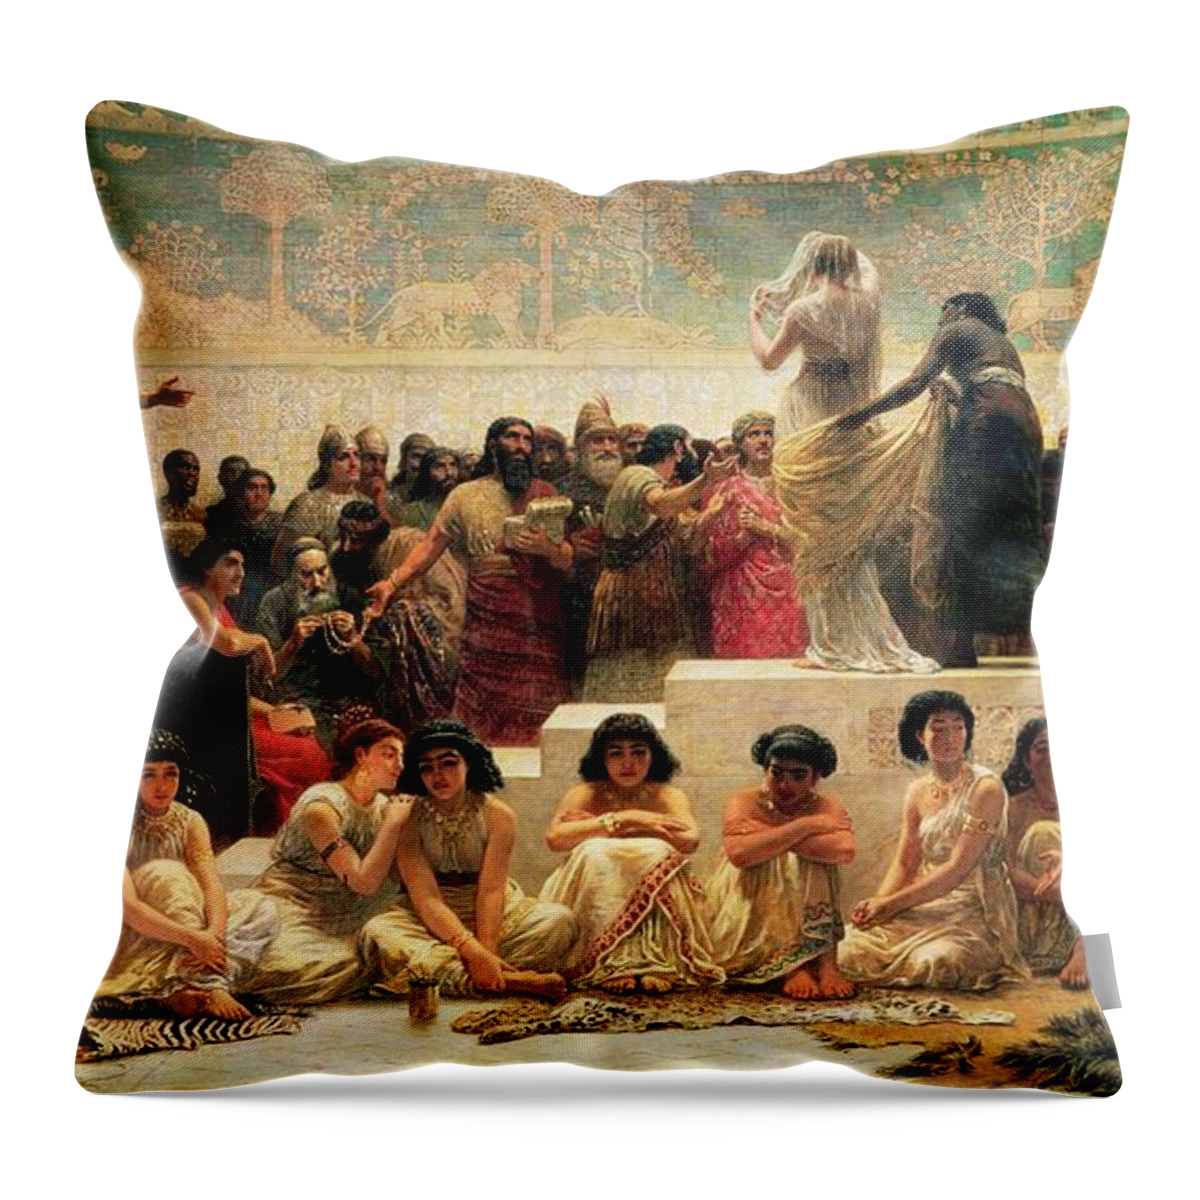 Iraq Throw Pillow featuring the painting The Babylonian Marriage Market, 1875 by Edwin Longsden Long